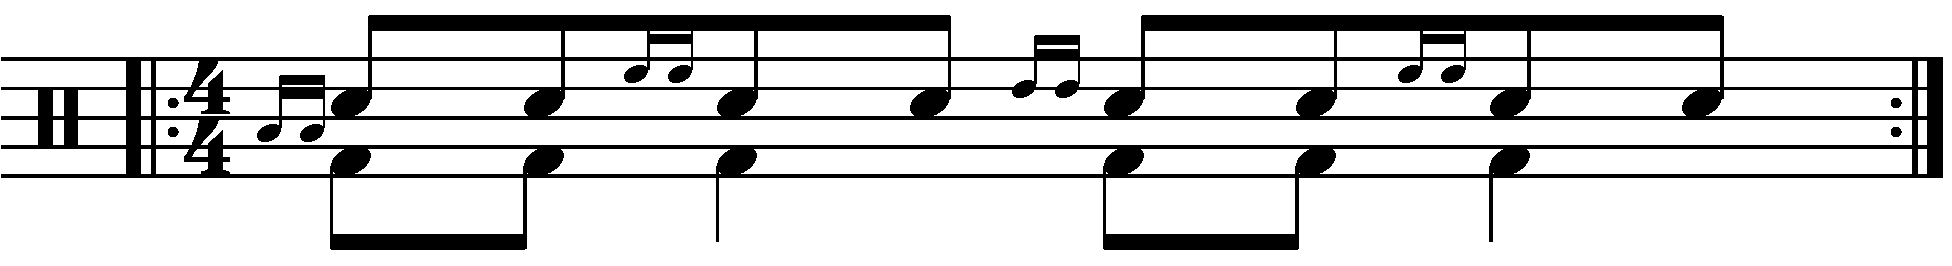 Drag tap with moving grace notes